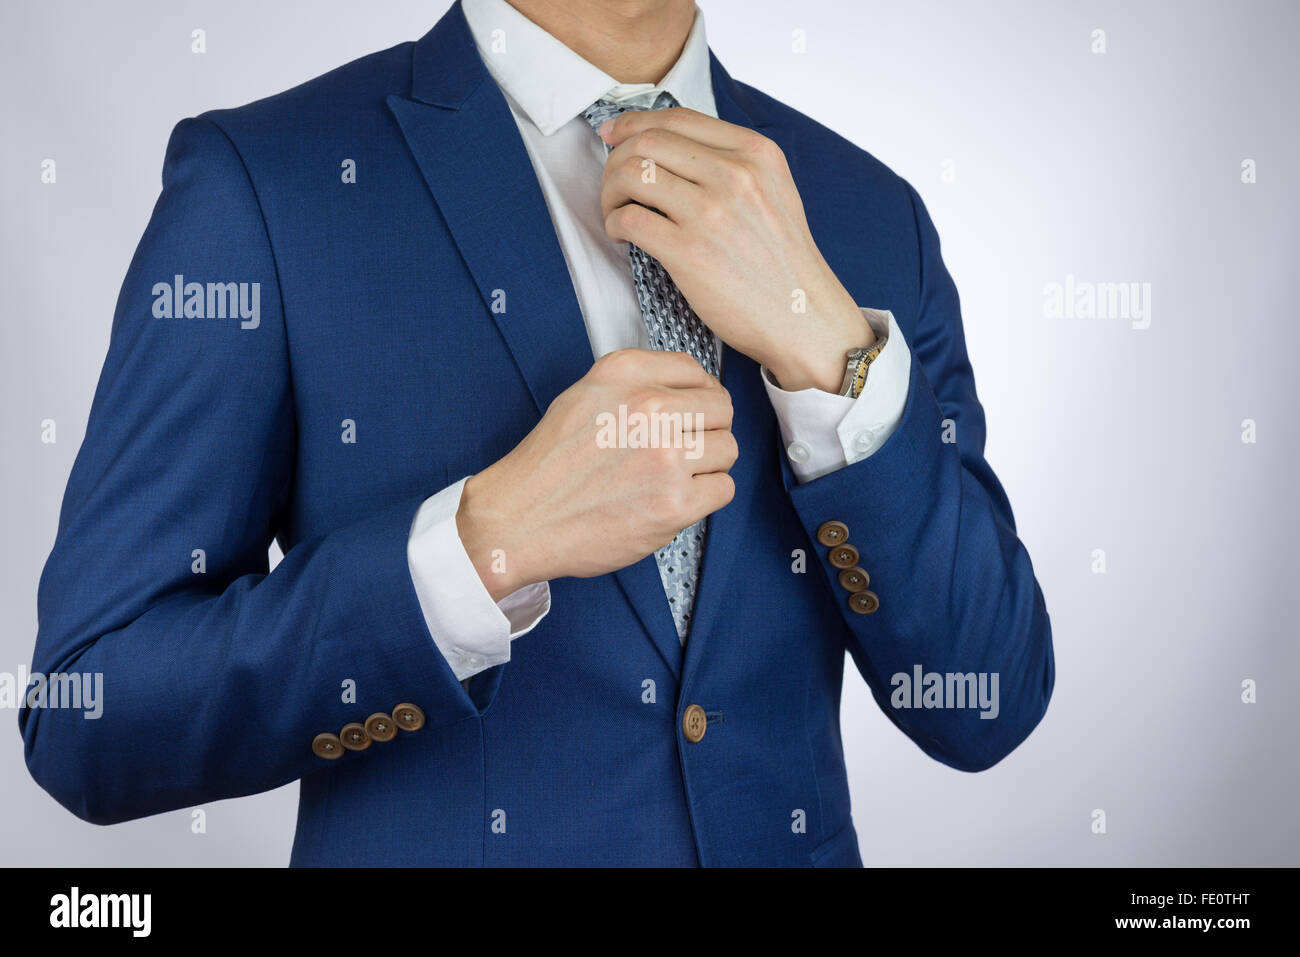 businessman fitting up blue suit and necktie Stock Photo